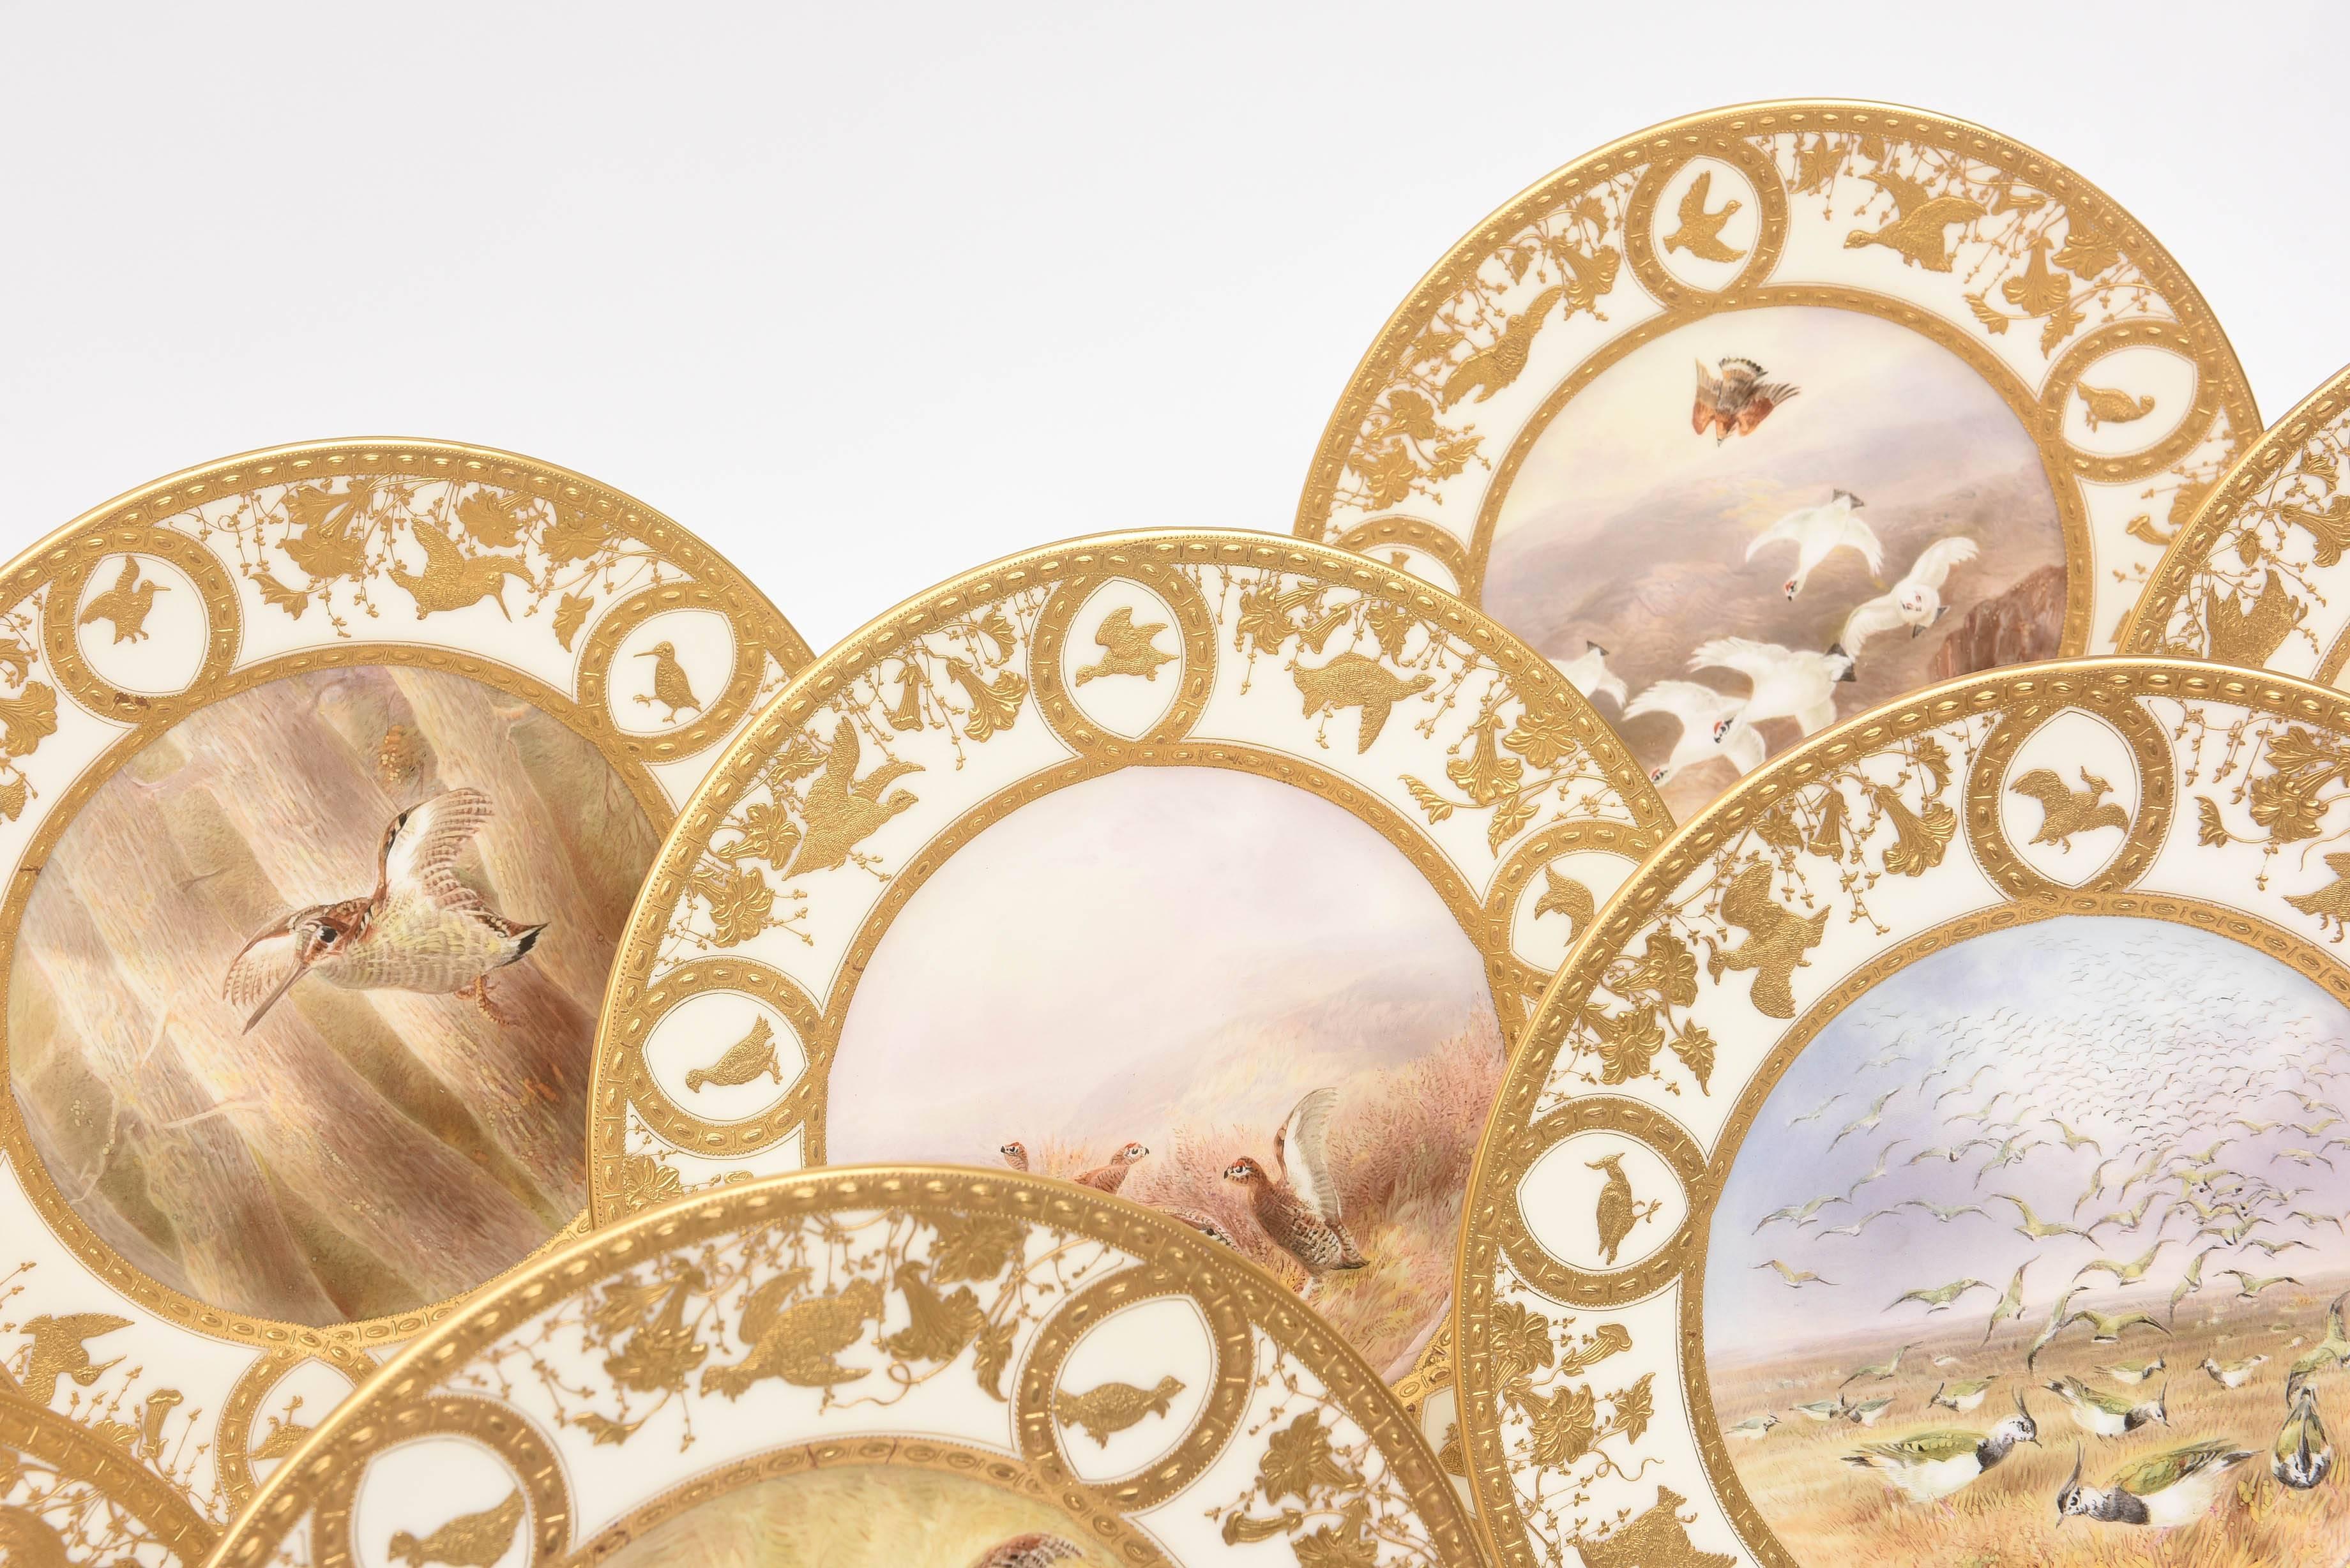 These rare and exquisite signed game bird plates were made for Davis Collamore & Co Ltd. by Royal Doulton, circa 1910. They were hand-painted by Joseph Birbeck ,Sr. who was from a distinguished family of porcelain painters. Birbeck joined Royal